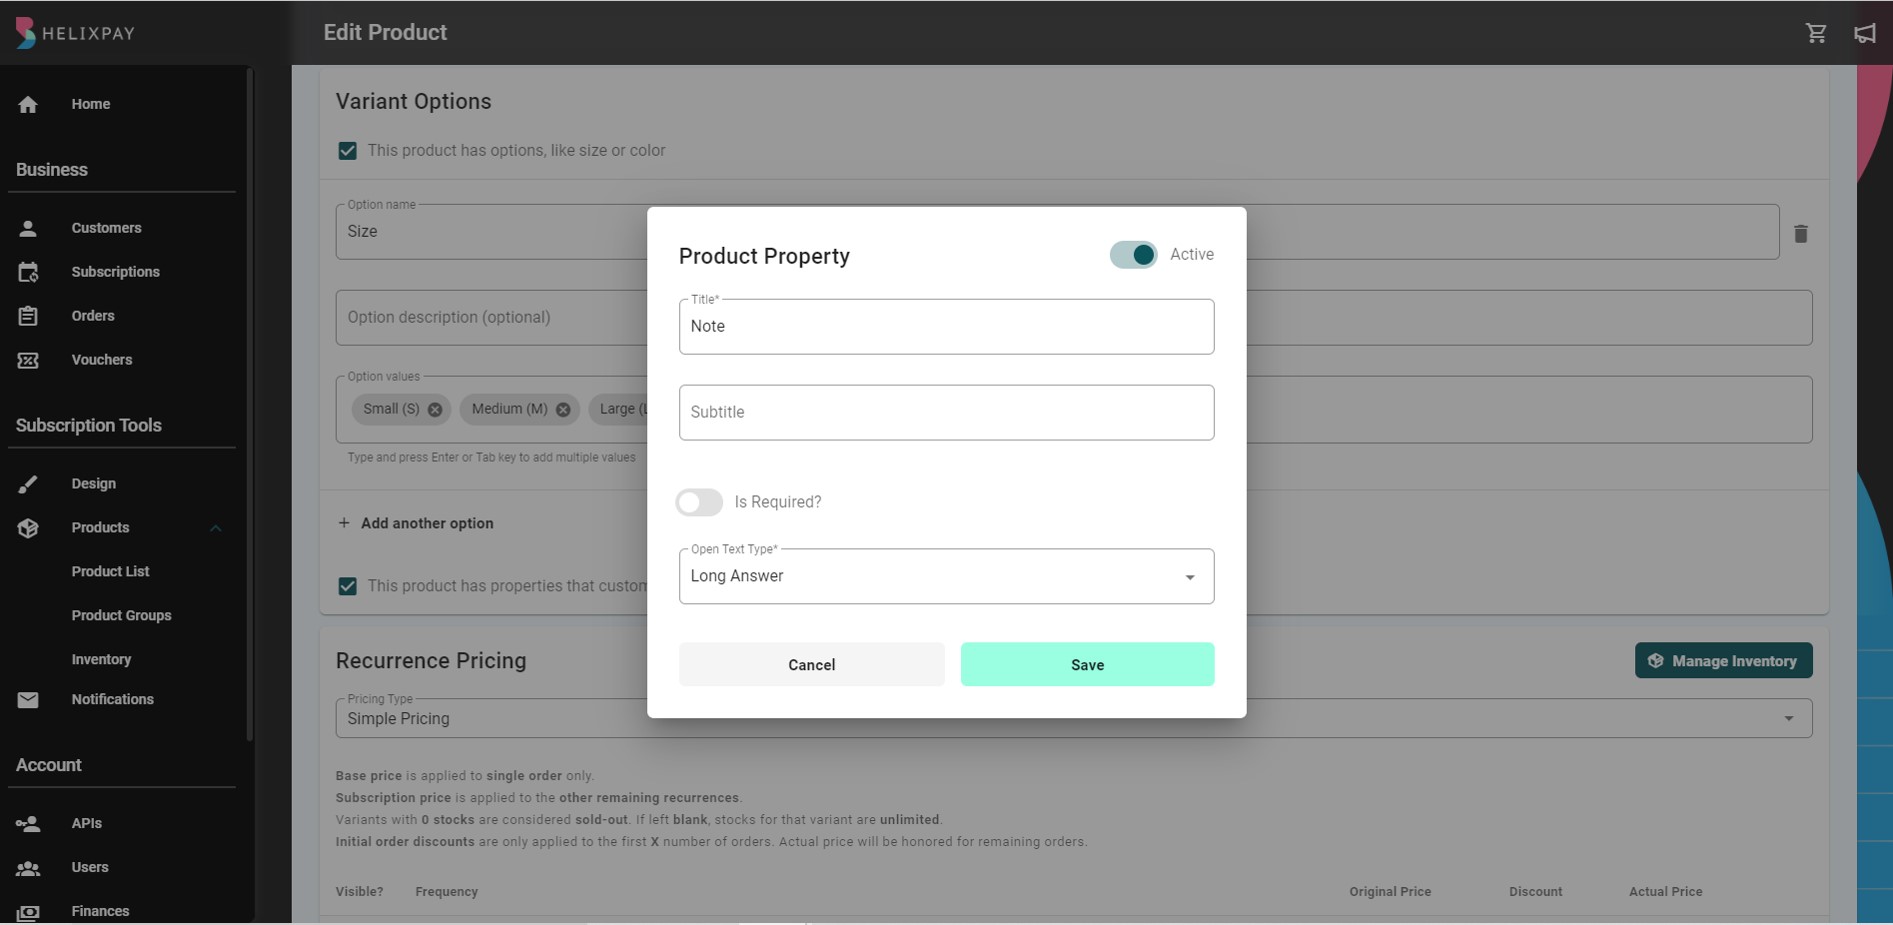 The Product Properties allow your customers to add a note to their order.